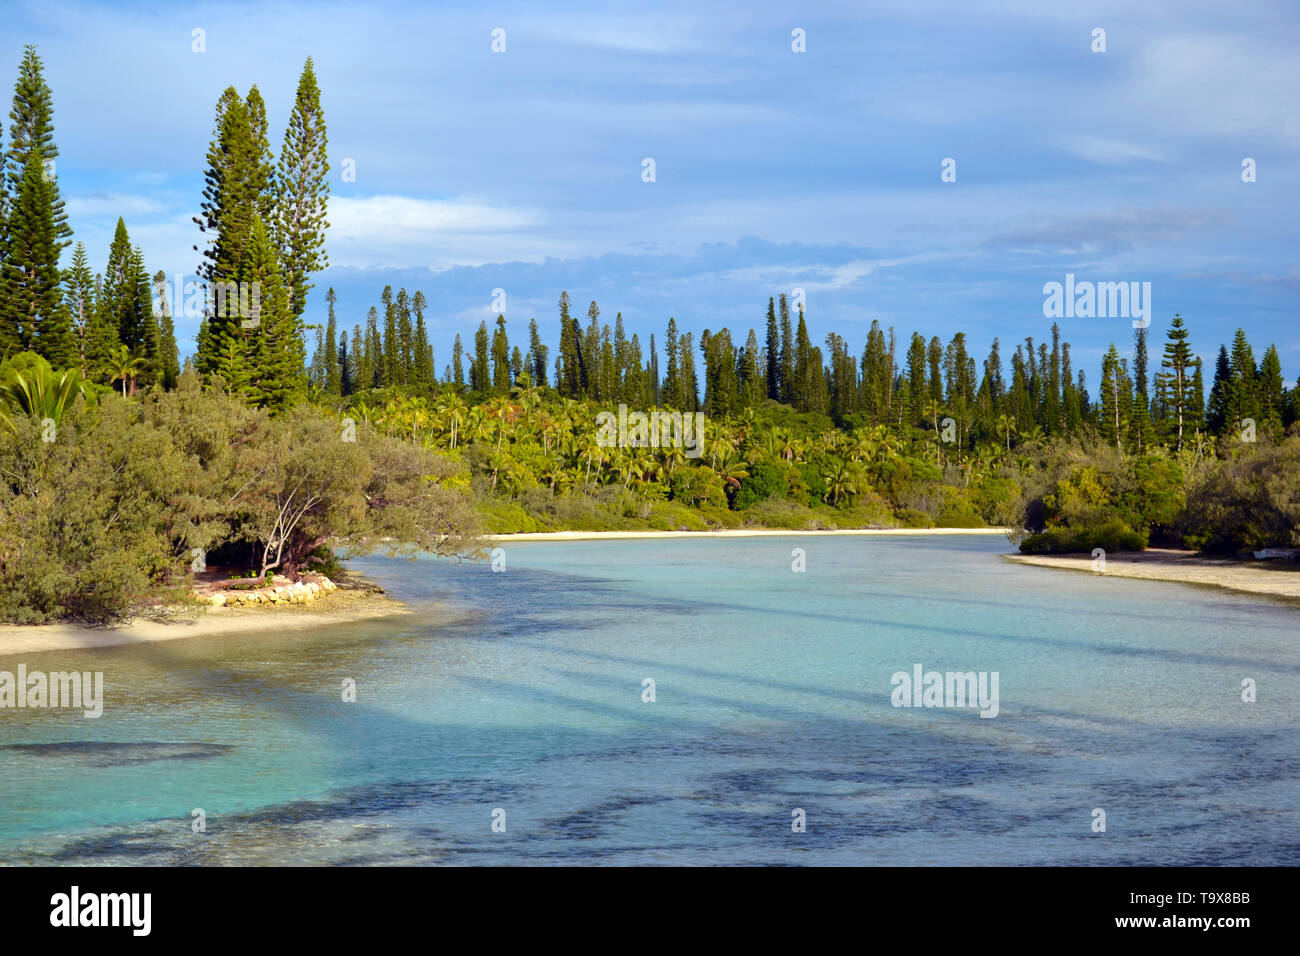 Endemic cook pines, Araucaria columnaris, Natural Pool of Oro Bay, Isle of Pines, New Caledonia, South Pacific Stock Photo